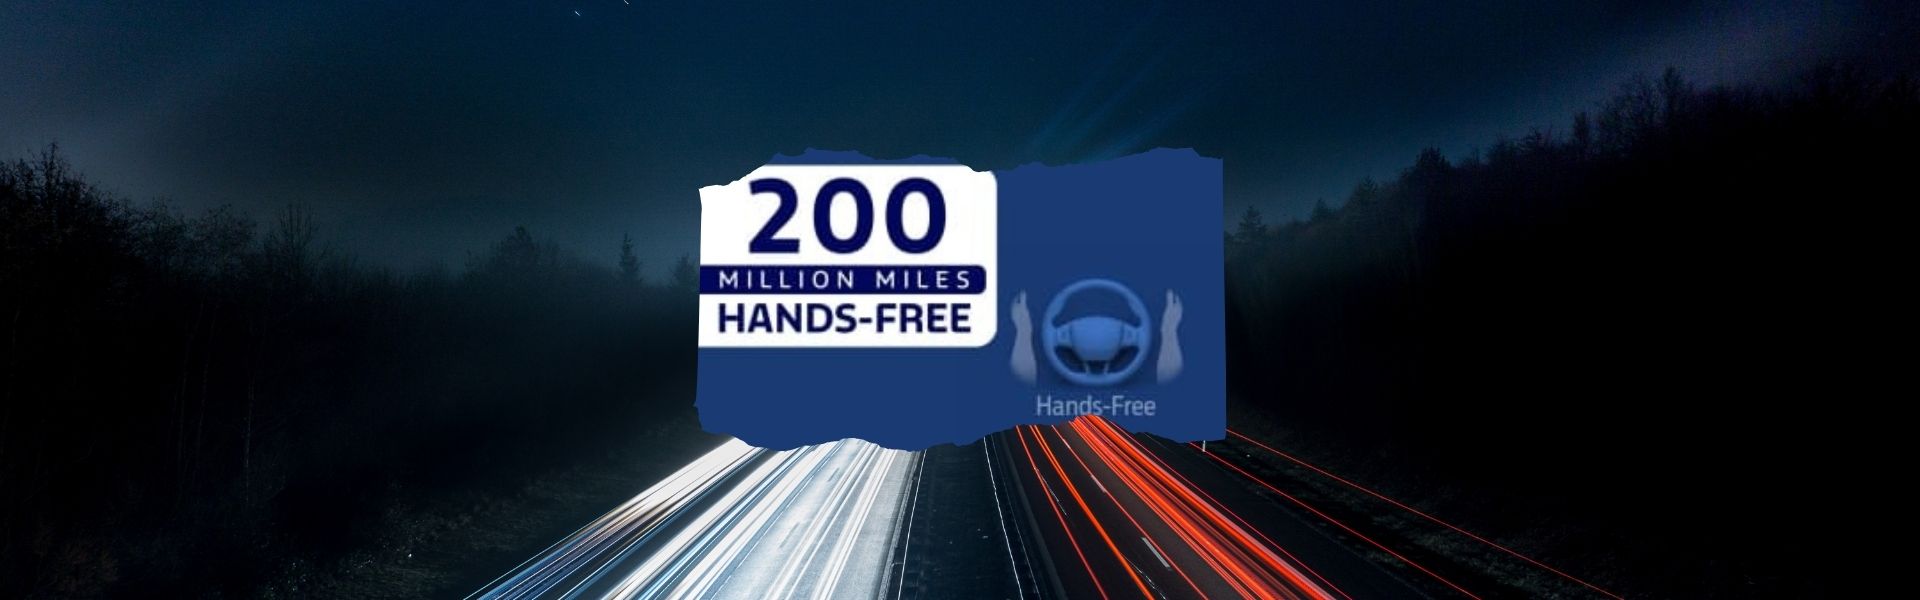 200 Million Hands-Free Miles with BlueCruise - Brattleboro Ford blog